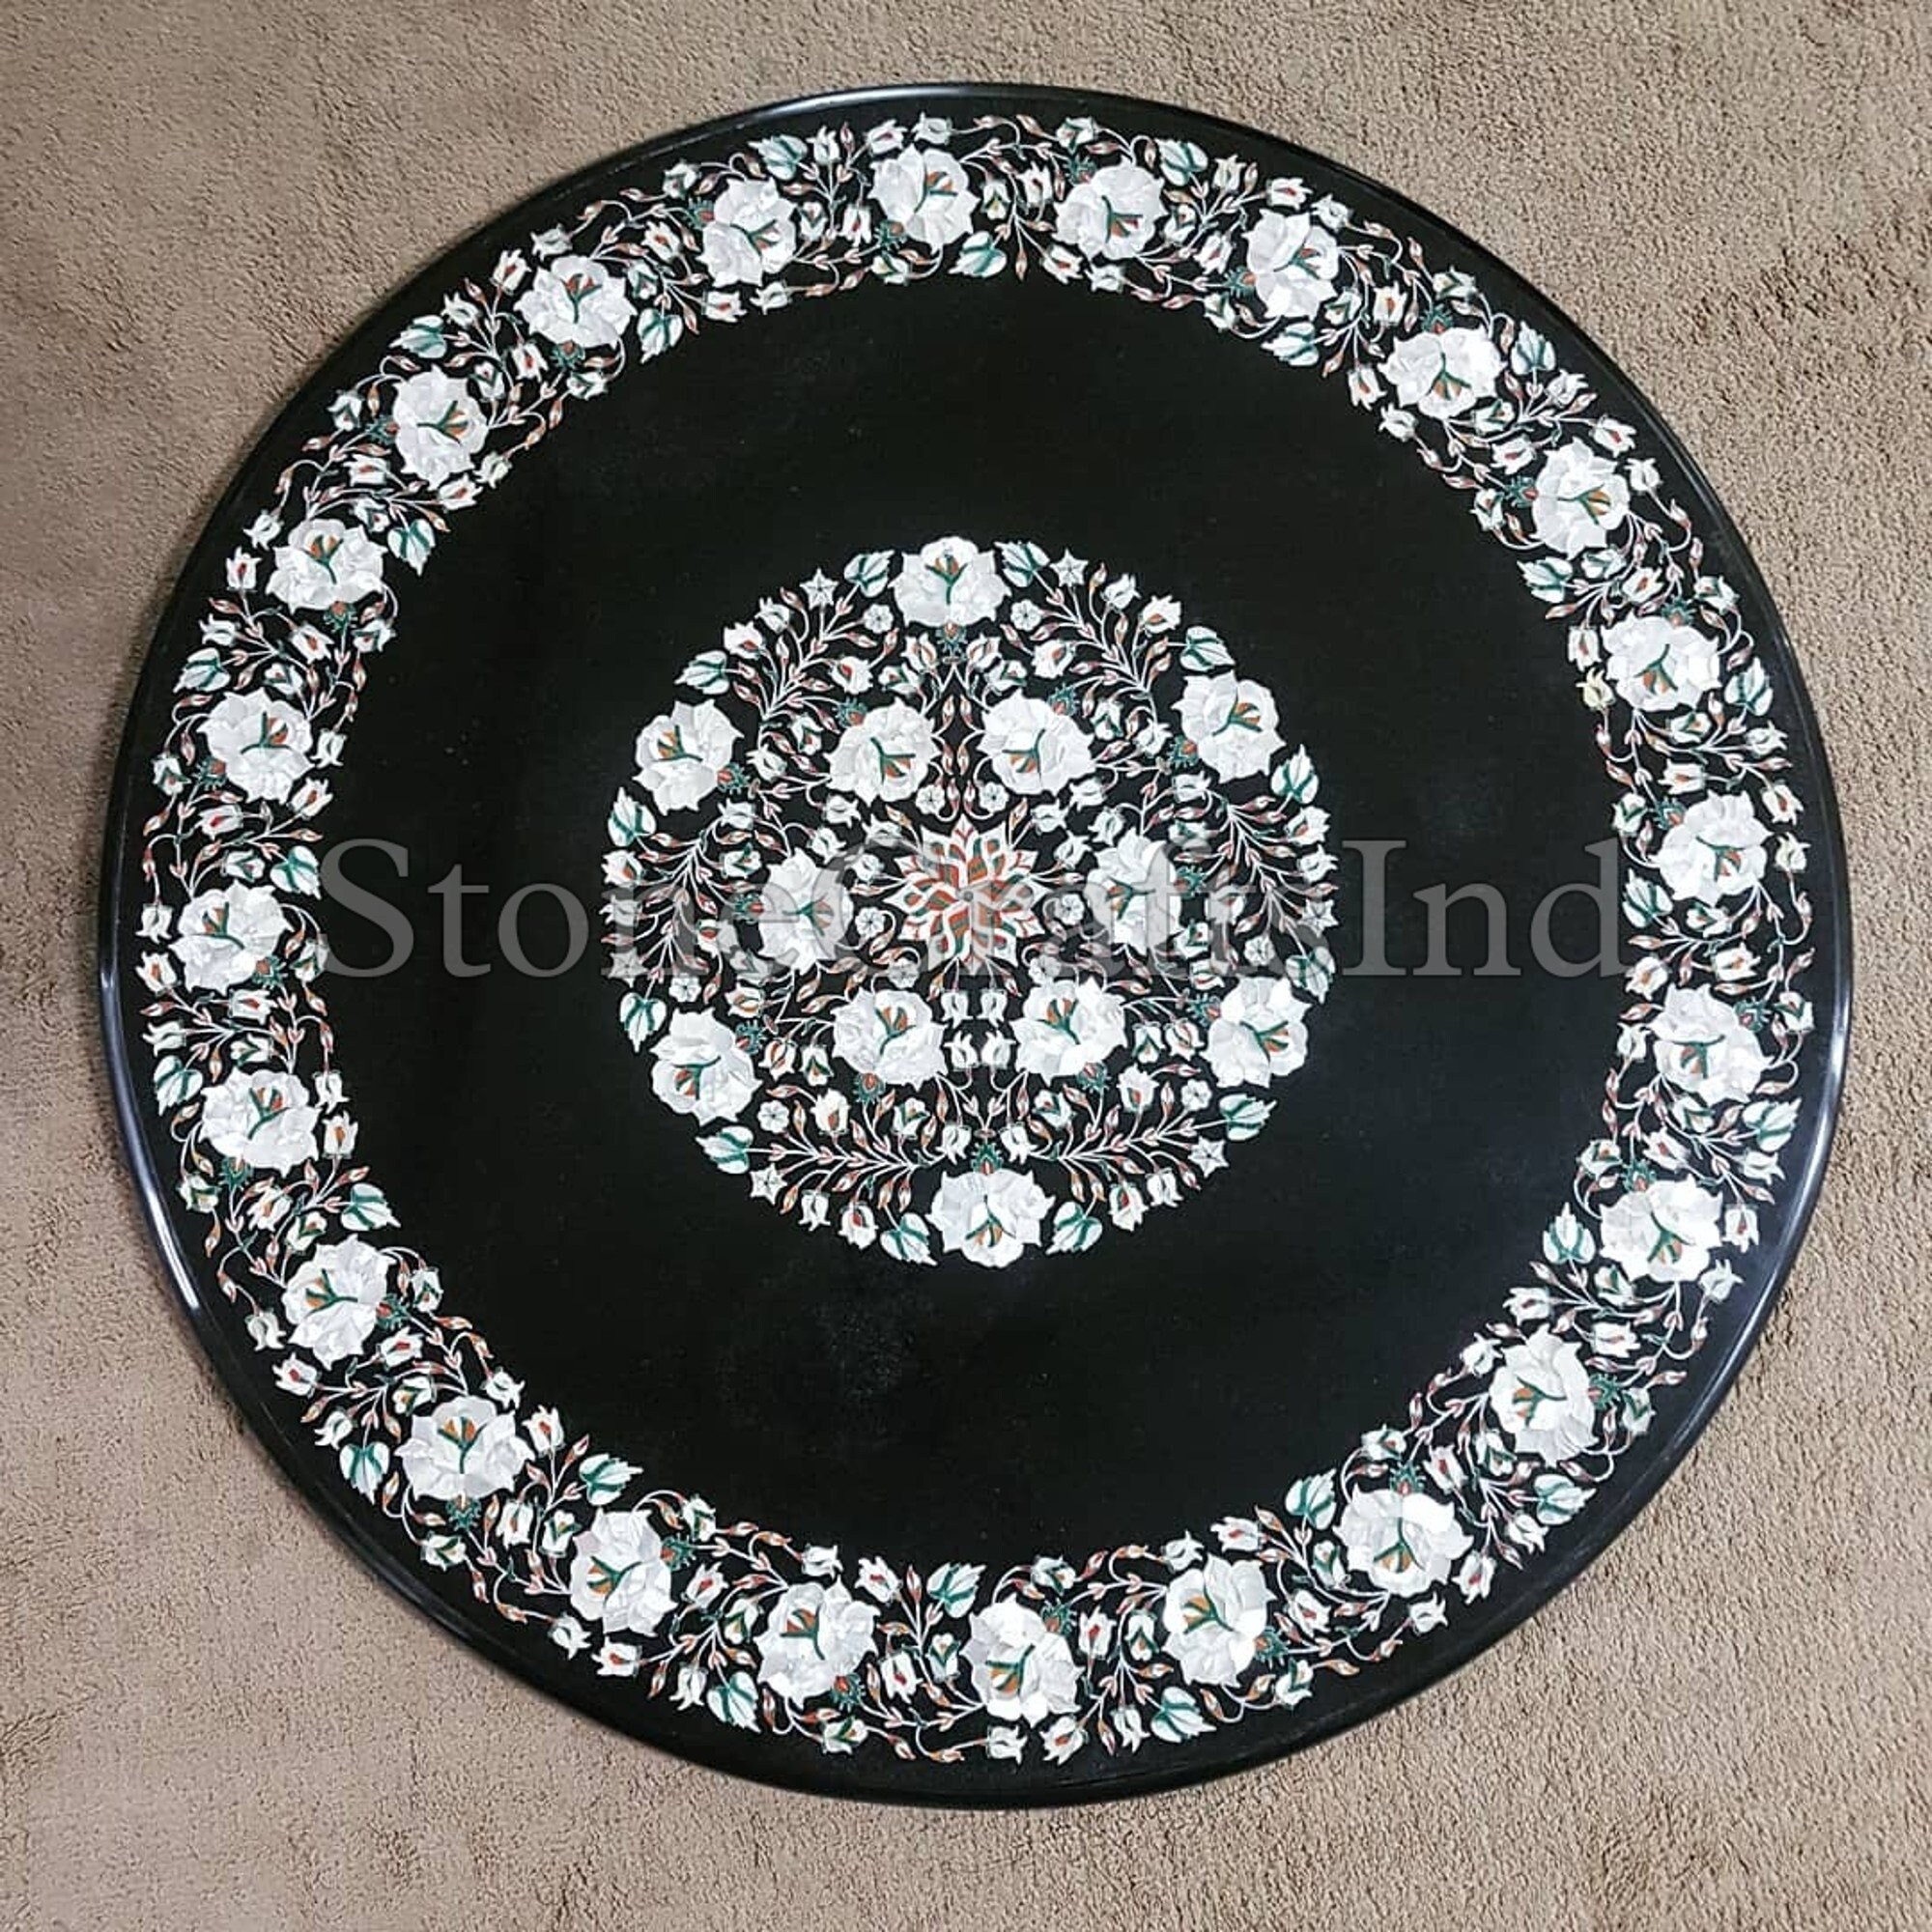 Mother of Pearl Table Top, Mother of Pearl Home Decor, Mother of